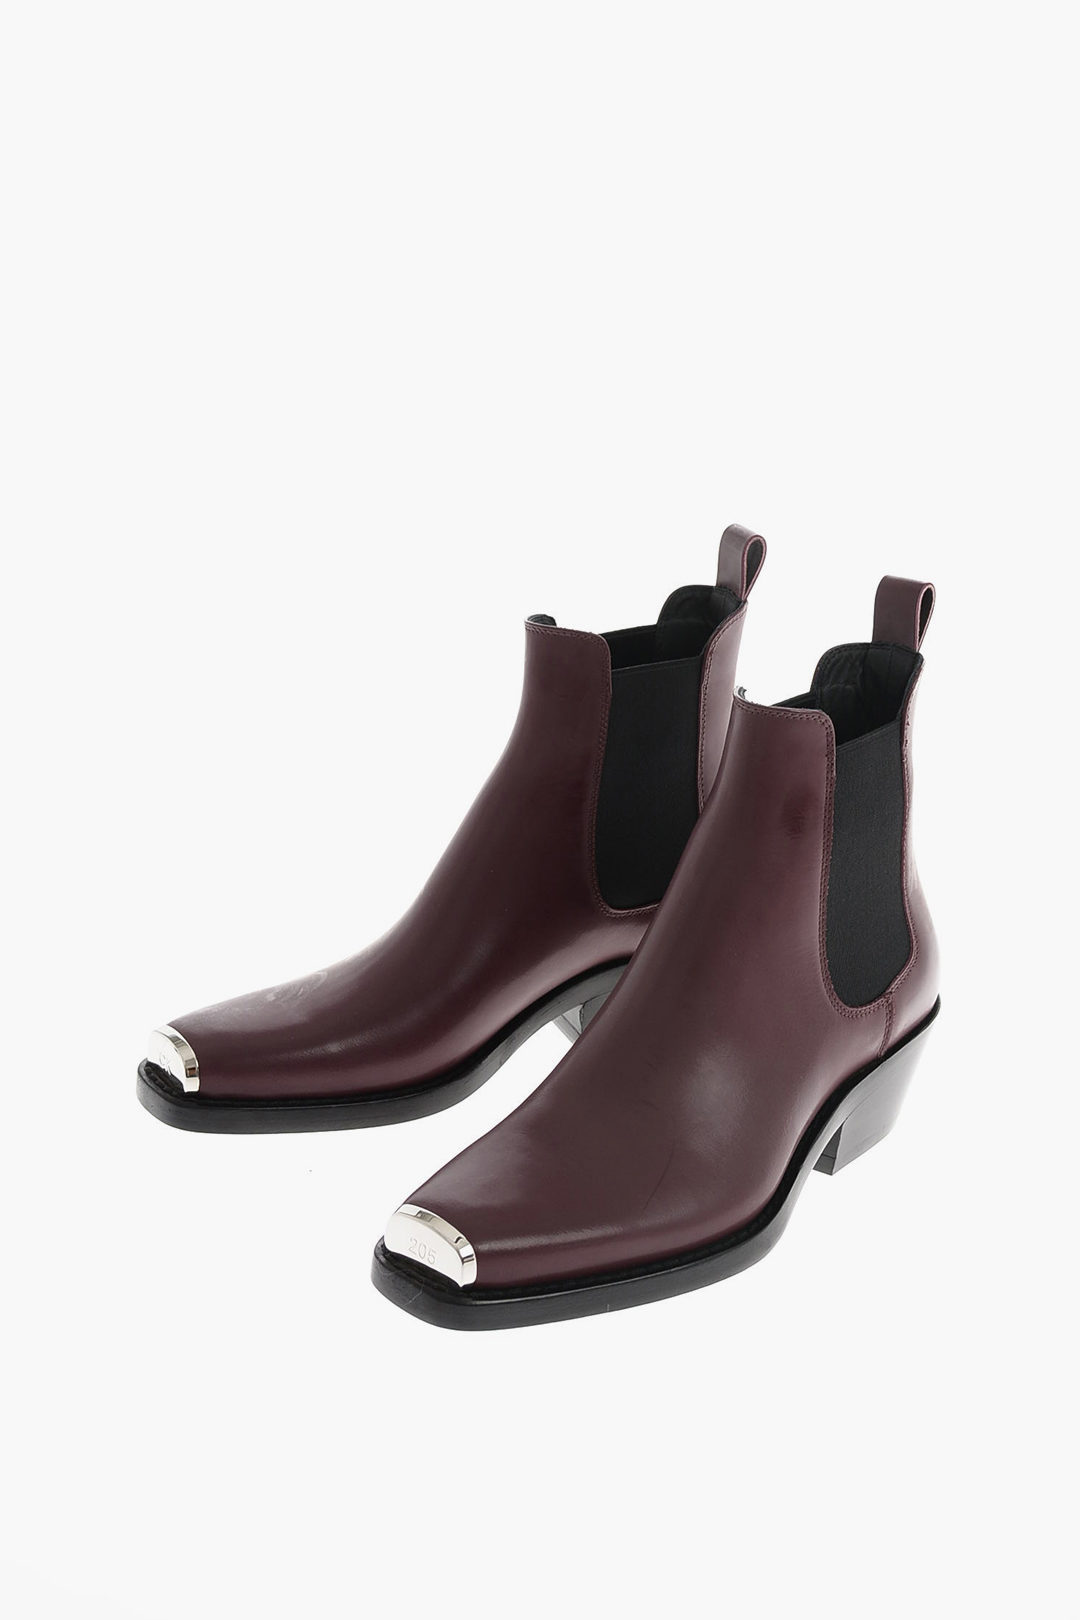 Calvin Klein 205W39NYC 5 cm leather Chelsea boots women - Glamood Outlet